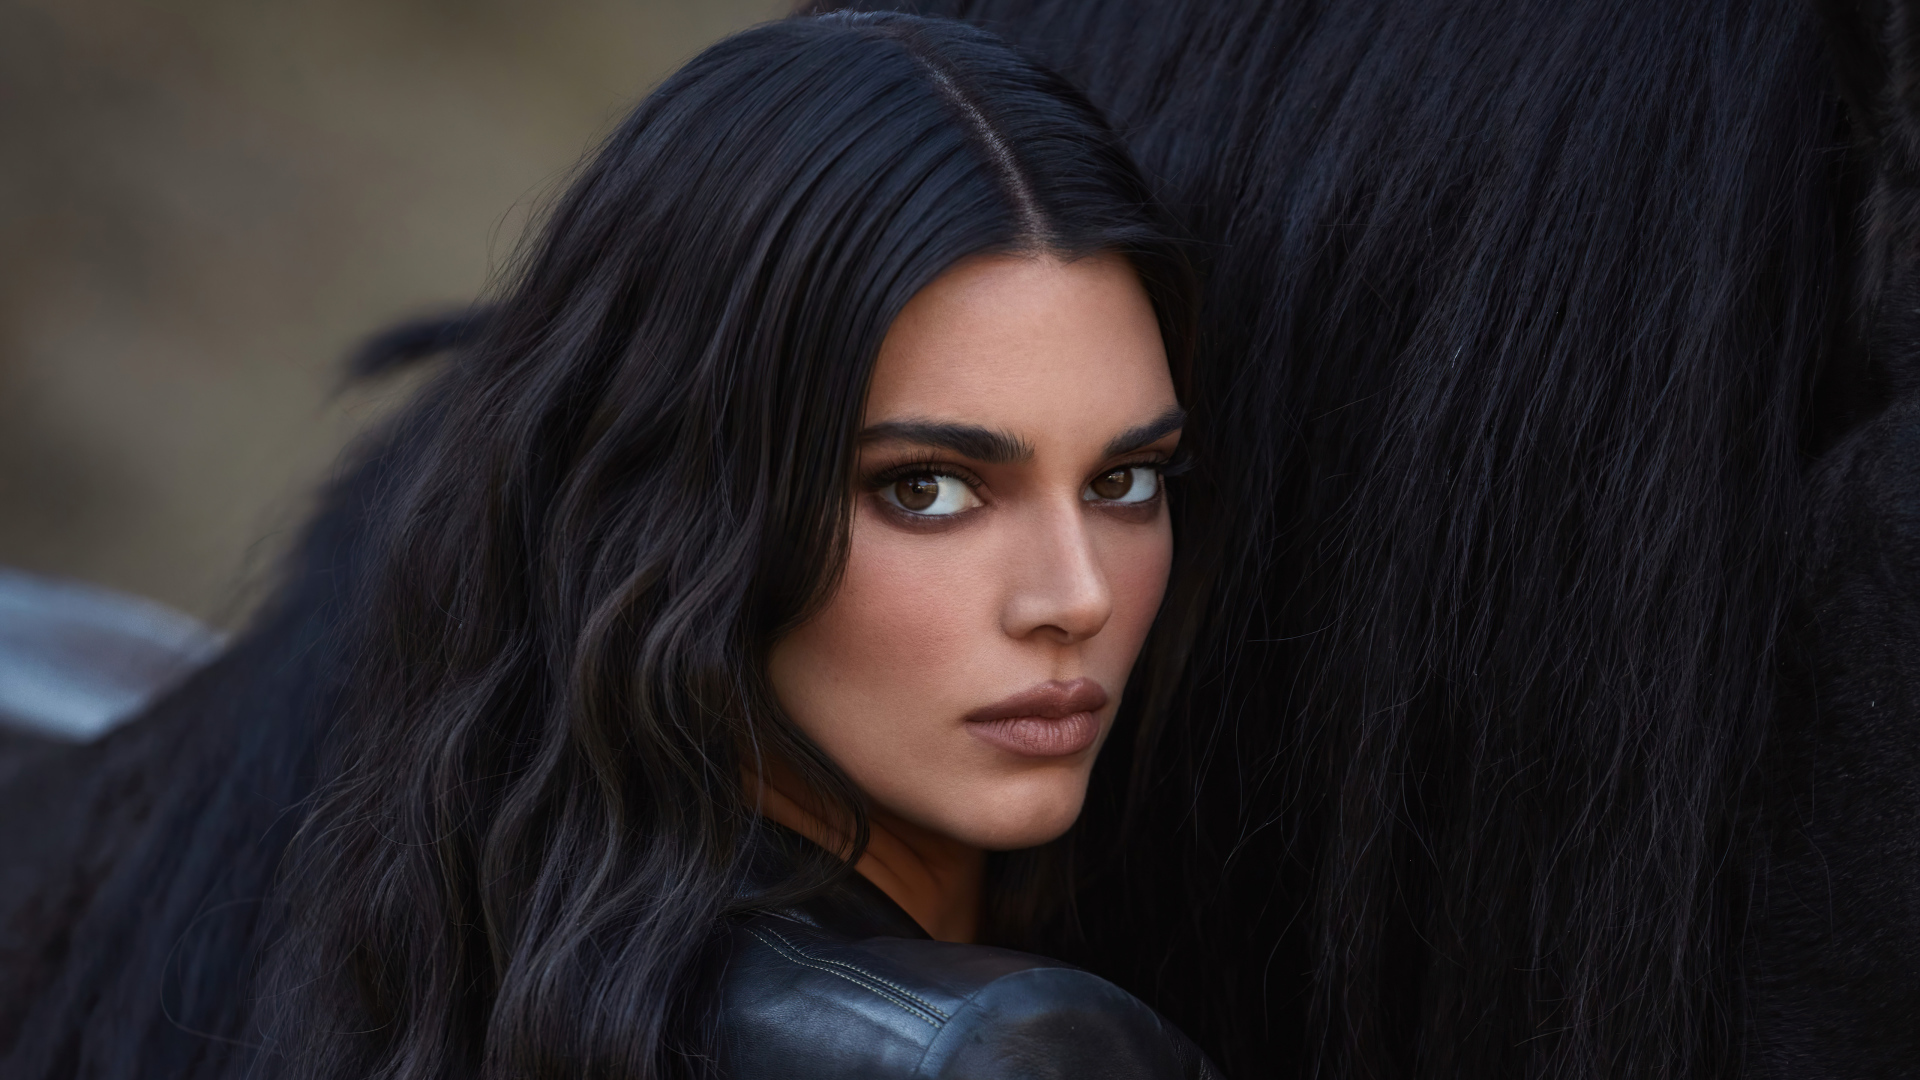 Burning brunette Kendall Jenner with a horse